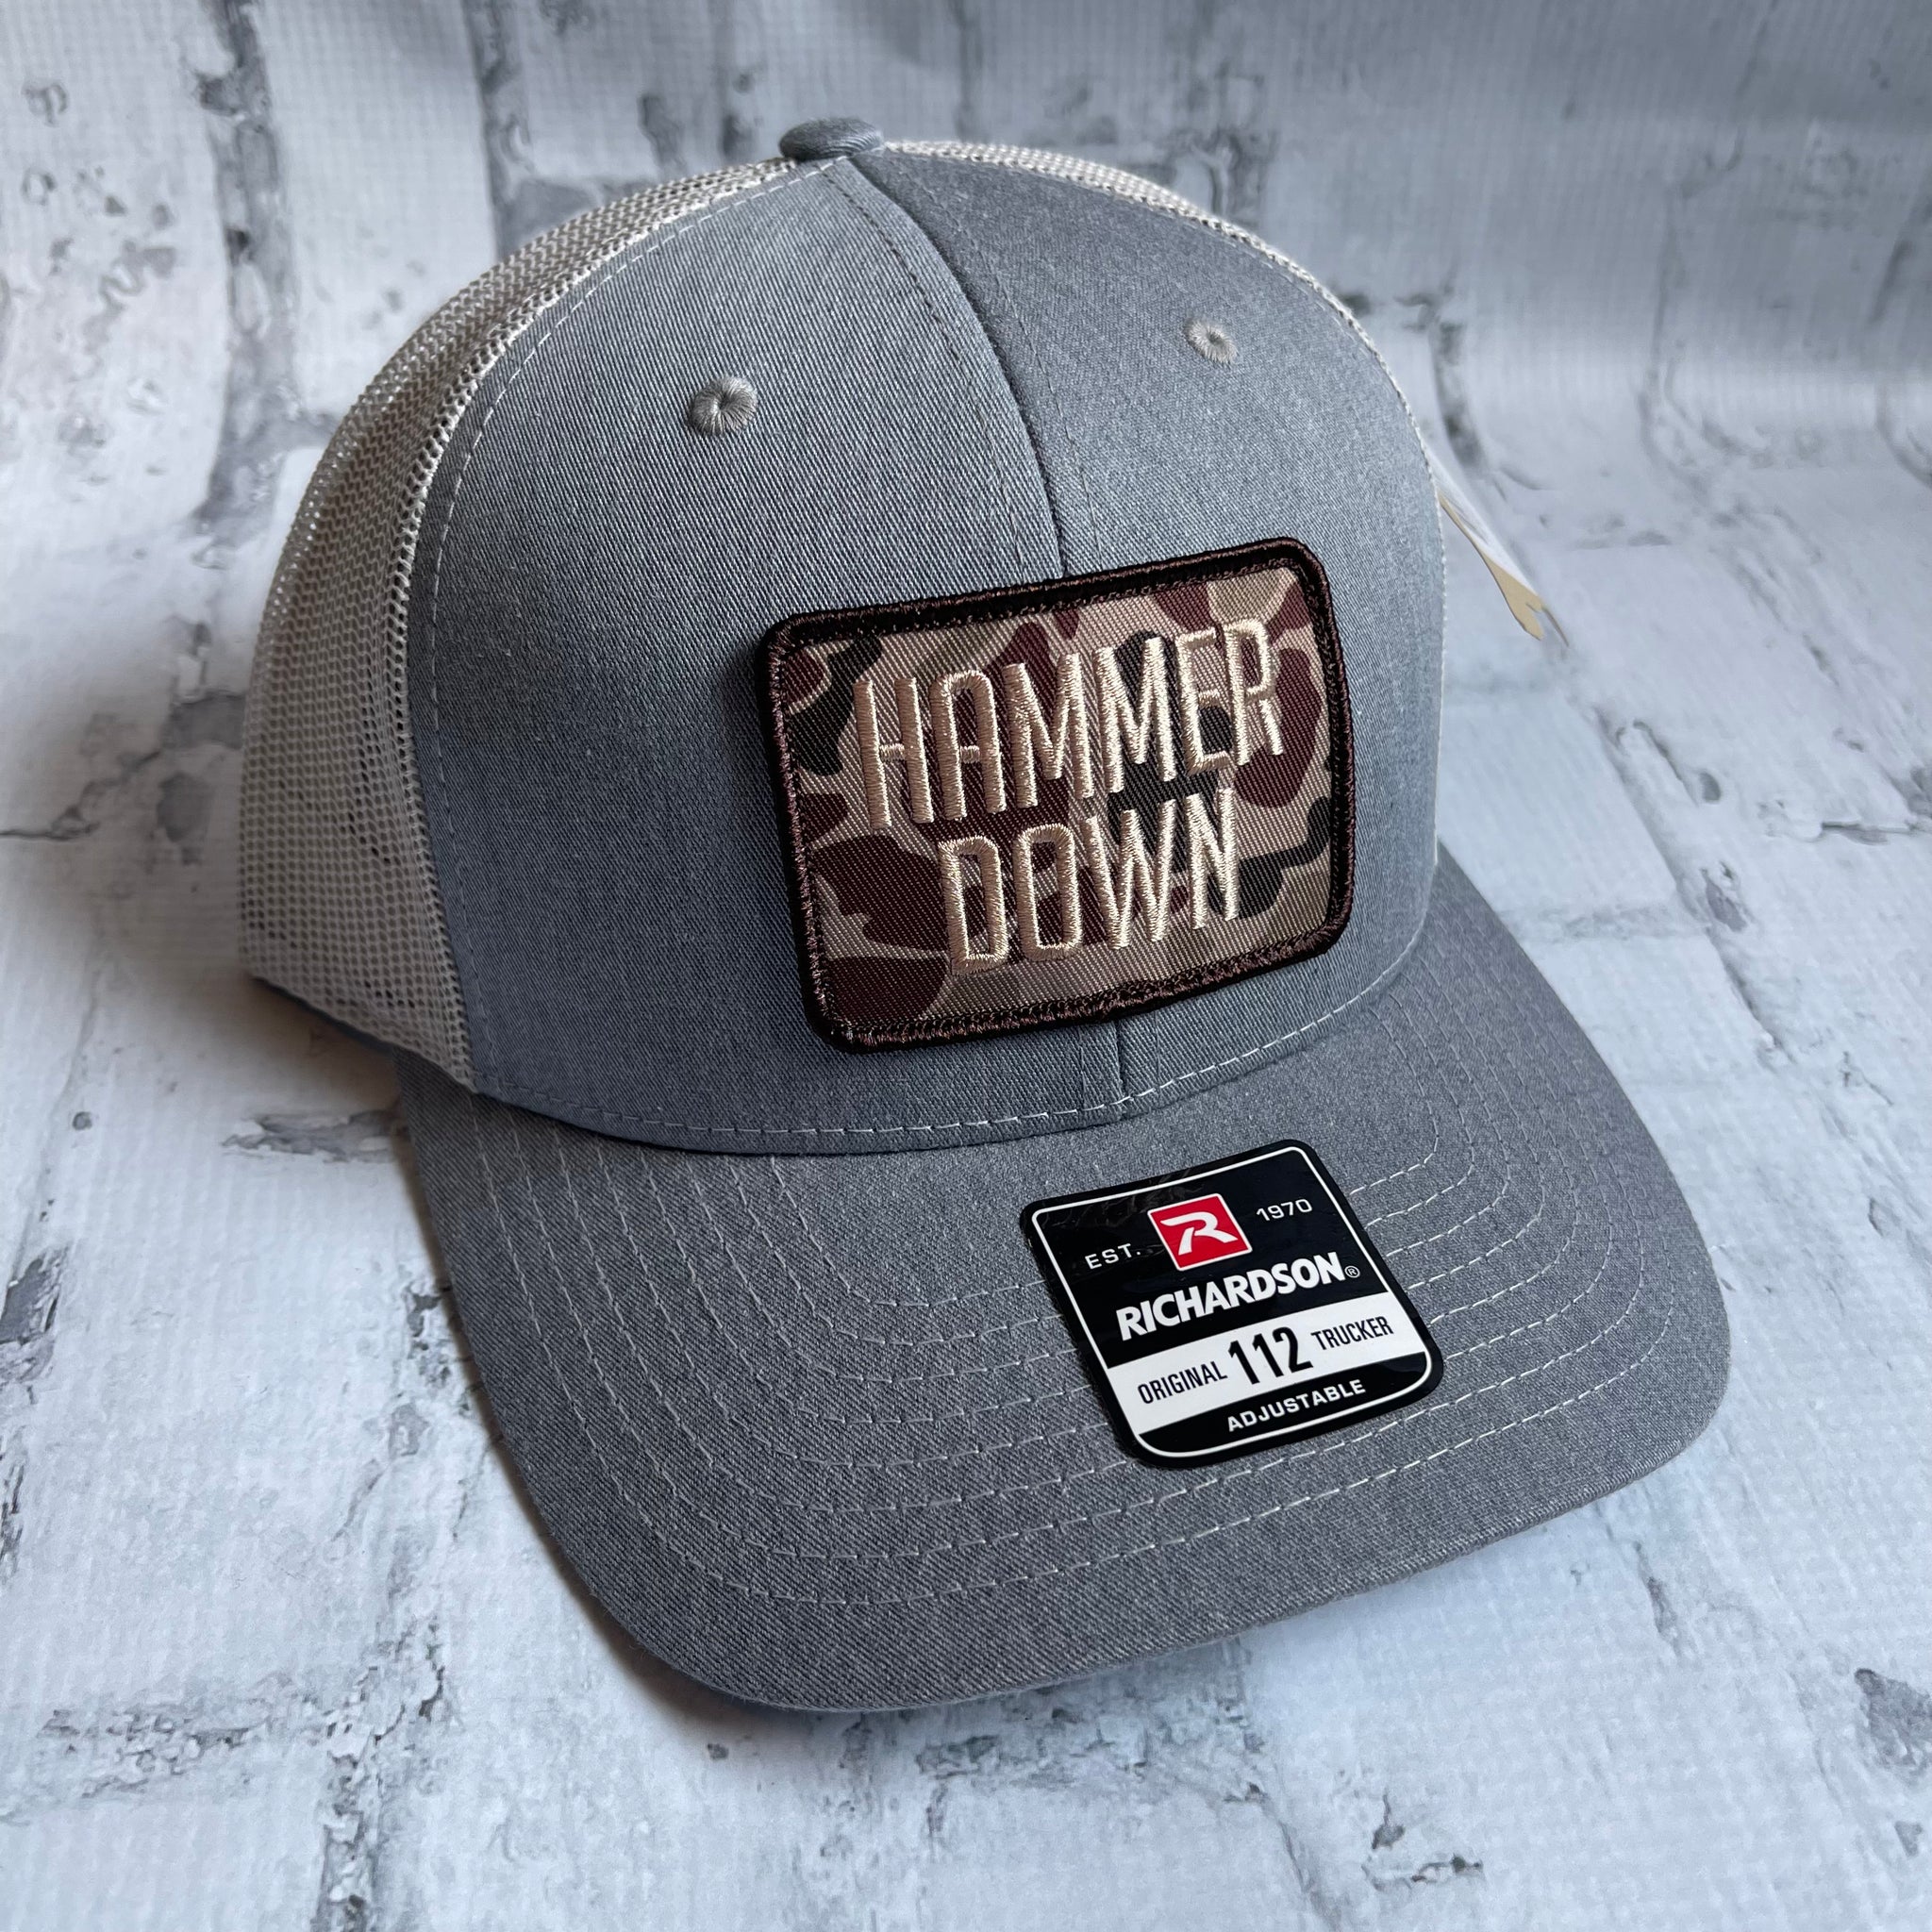 Hammer Down "Simple Brown Duck Camo" Hat - Heather Gray with Woven Patch - Southern Charm "Shop The Charm"